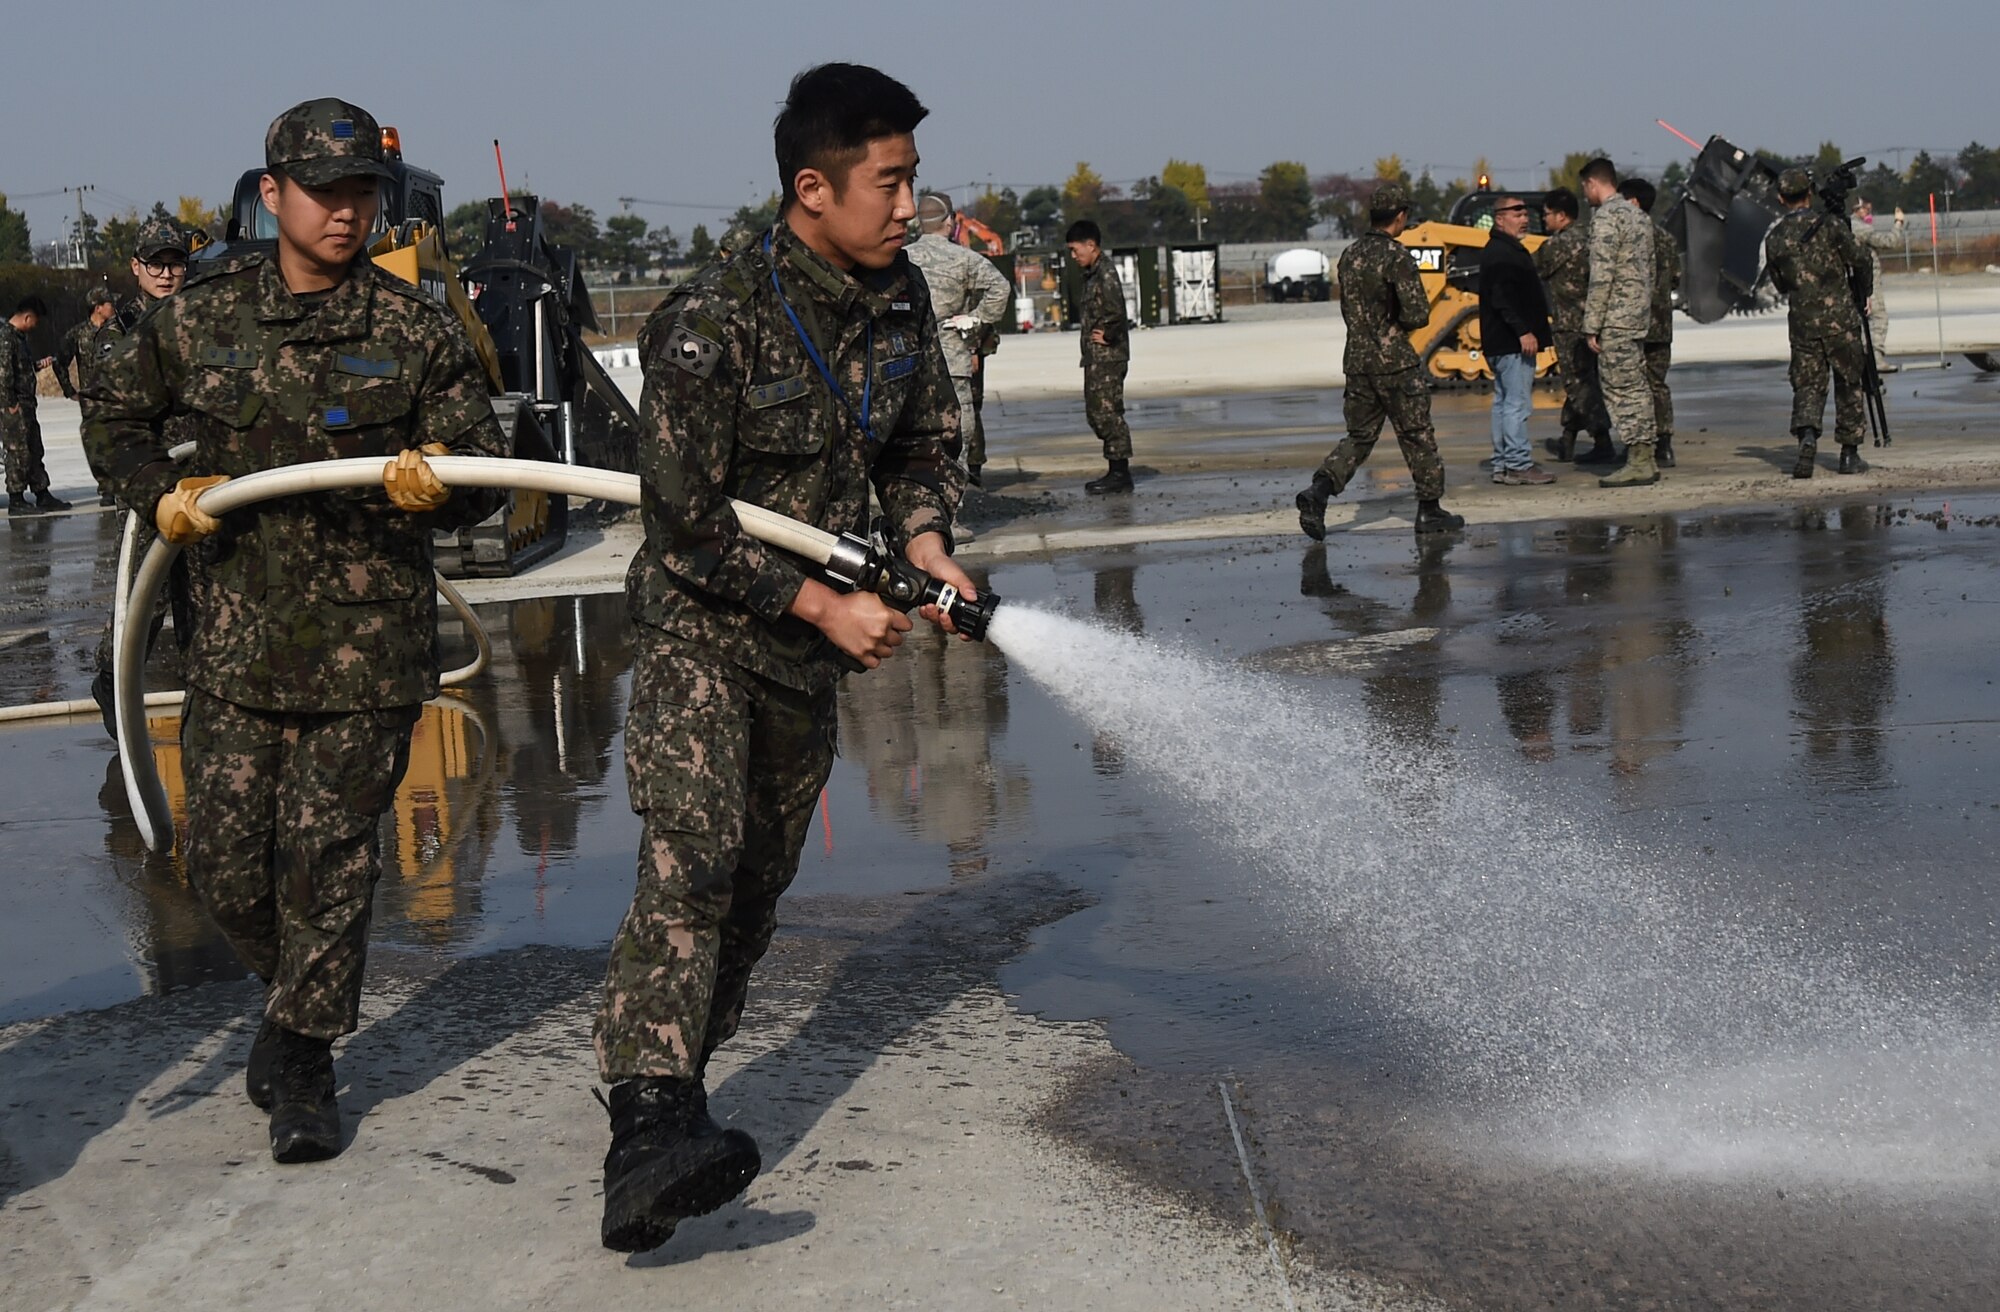 Republic of Korea Air Force Airmen participate in a Rapid Airfield Damage Repair training exercise at Gwangju Air Base, R.O.K., Nov. 8, 2017. Approximately forty U.S. Airmen from the 773d Civil Engineer Squadron at Joint Base Elmendorf-Richardson, Alaska, and 40 R.O.K. Airmen from Gwangju trained together for a week to learn a new runway repair process for wartime contingencies. The bilateral training exercise enhanced interoperability and built partnership capacity in the Indo-Asia Pacific region. (U.S. Air Force photo by Senior Airman Curt Beach)